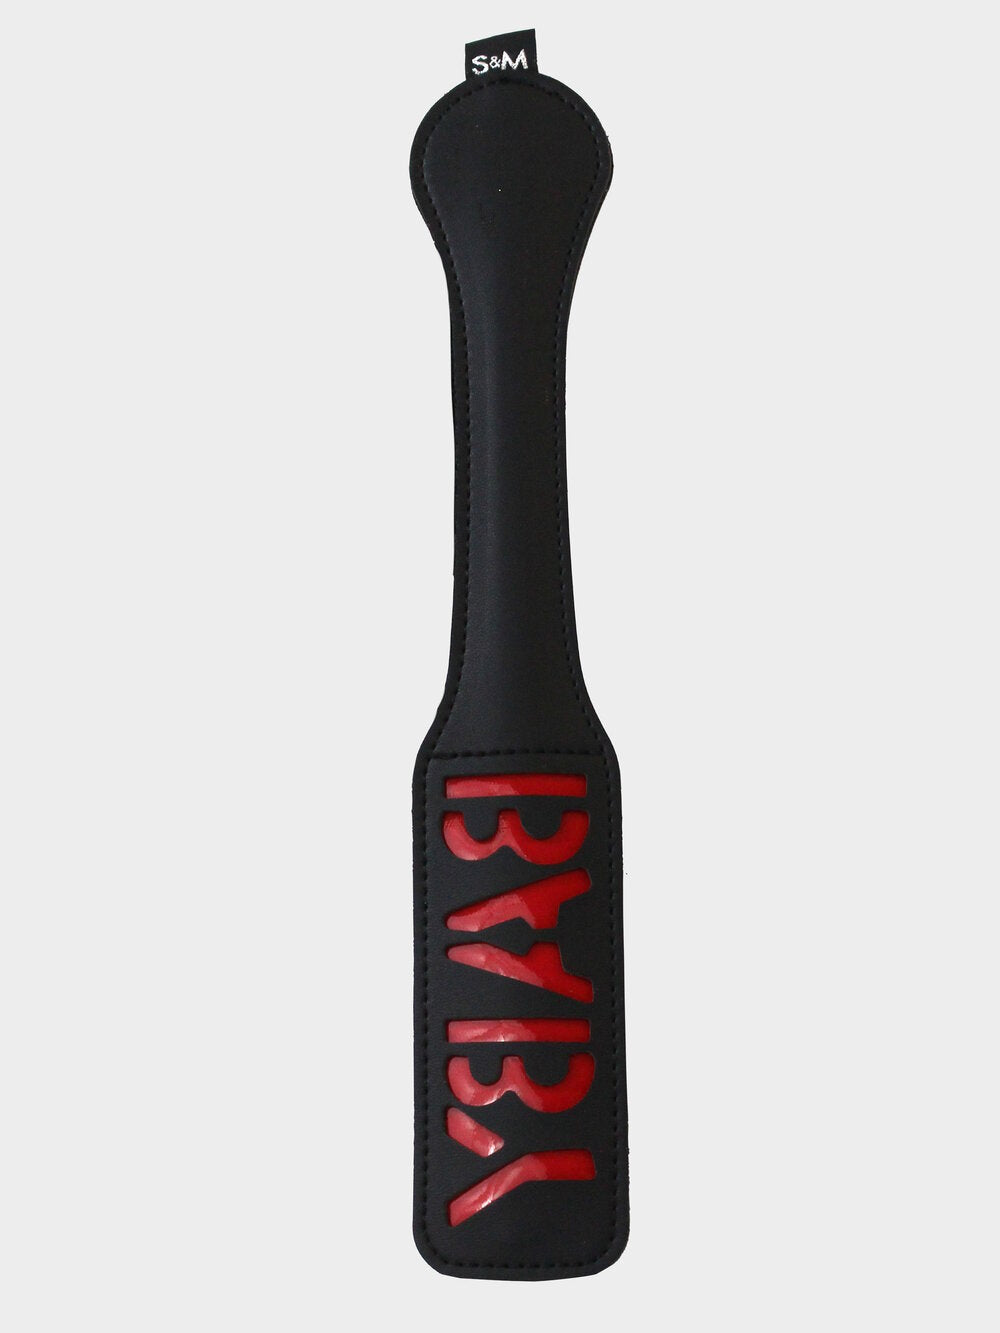 Sex and Mischief BABY Paddle